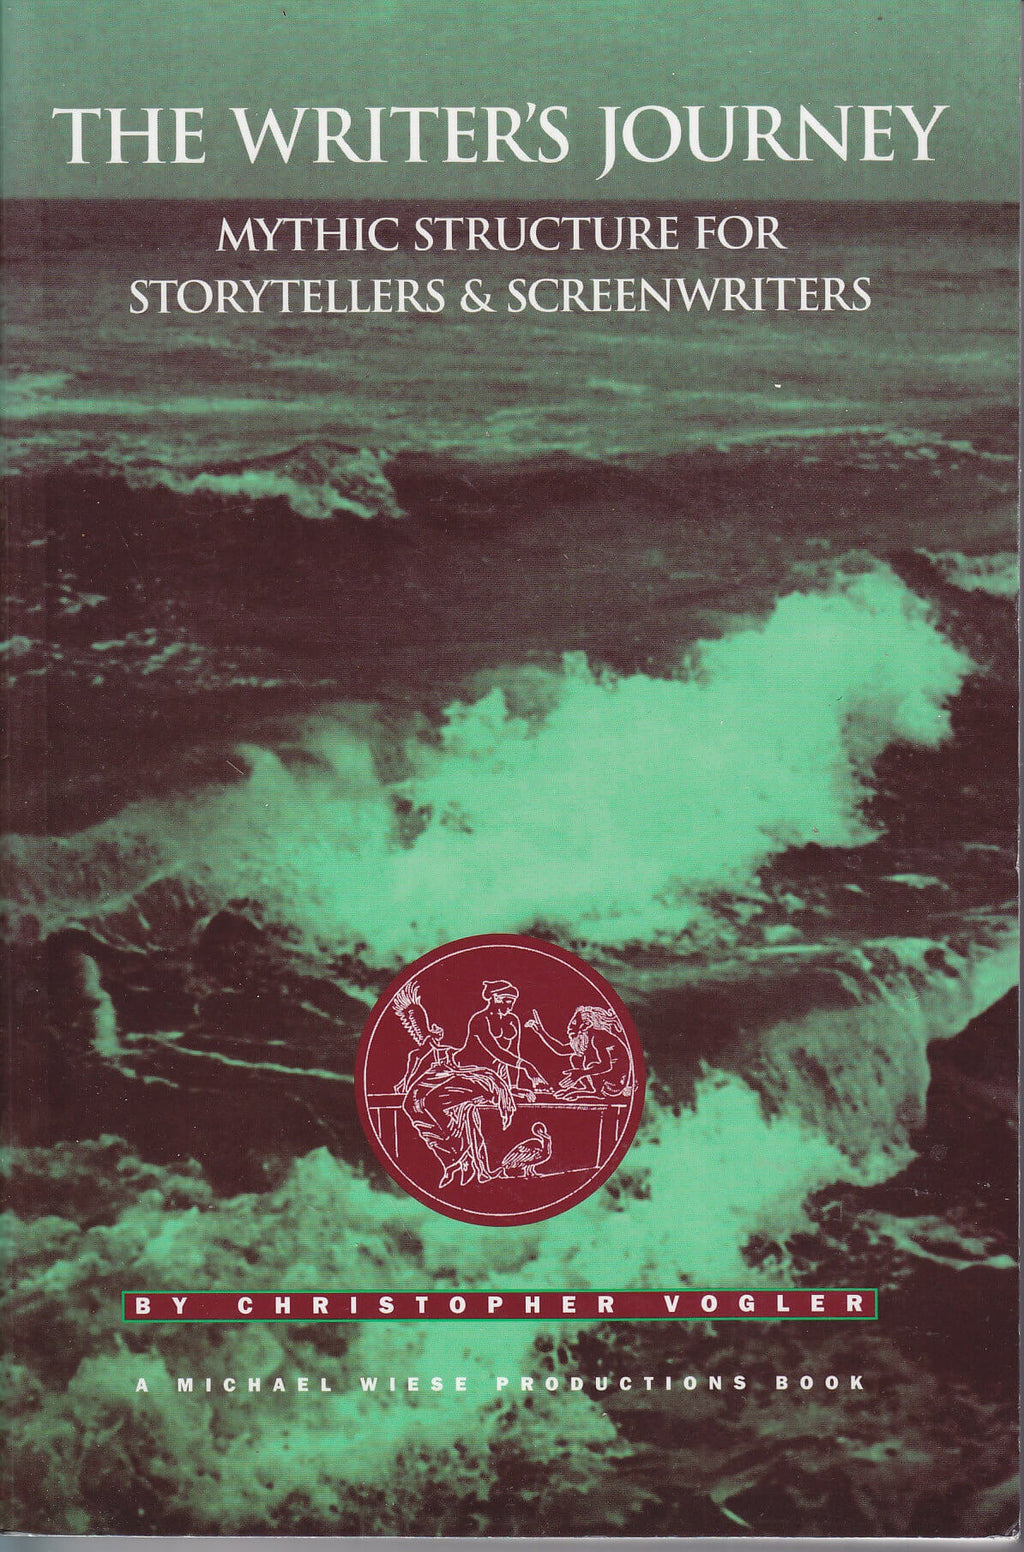 The Writer's Journey - Mythic Structure for Storytellers and Screenwriters by Christopher Vogel | Books of Knowledge